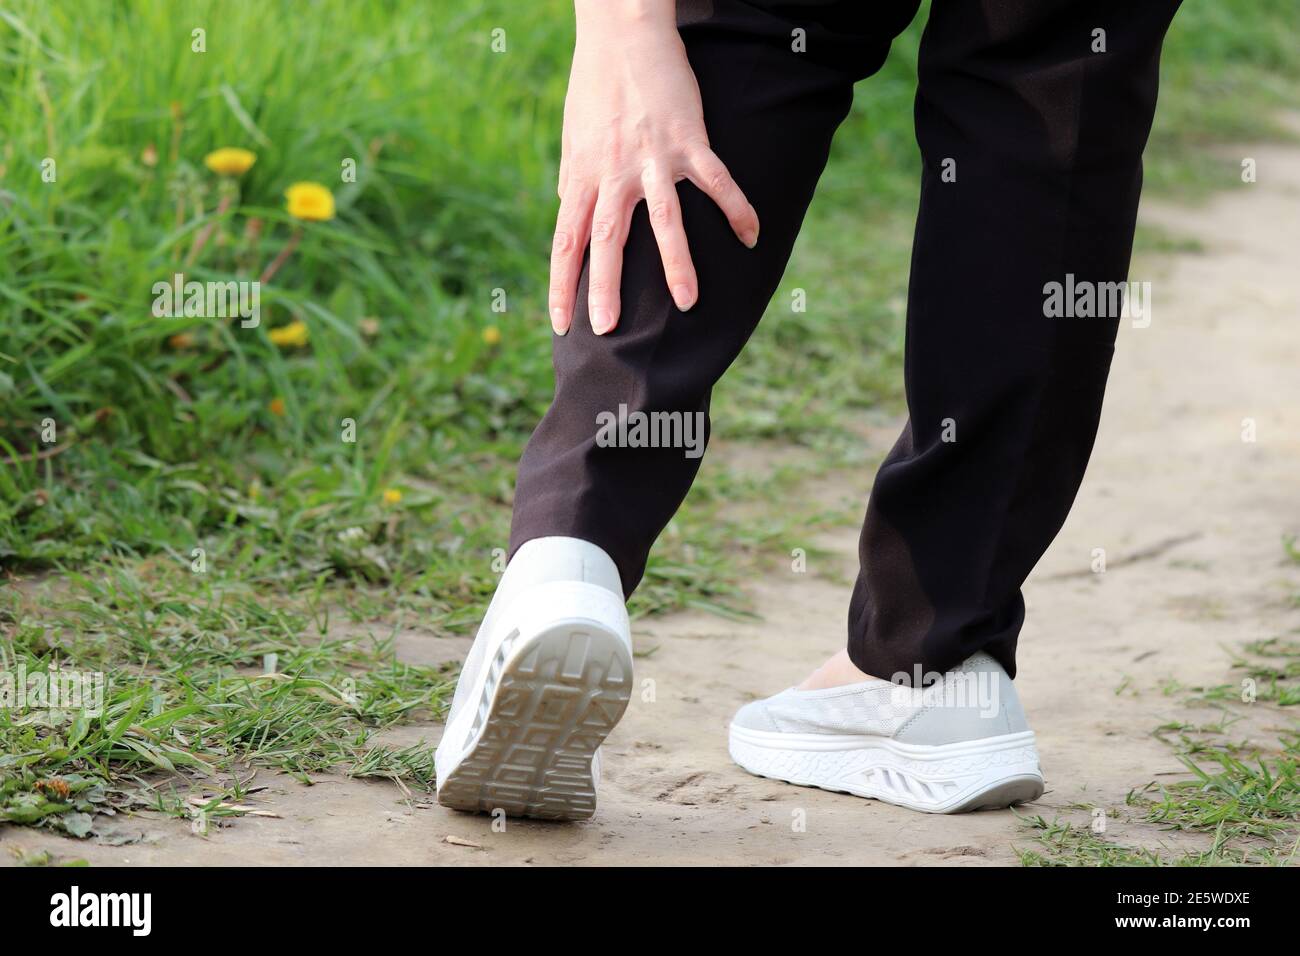 Ankle sprain, woman grabbed her leg while walking on a nature. Concept of tired legs, injury on running Stock Photo